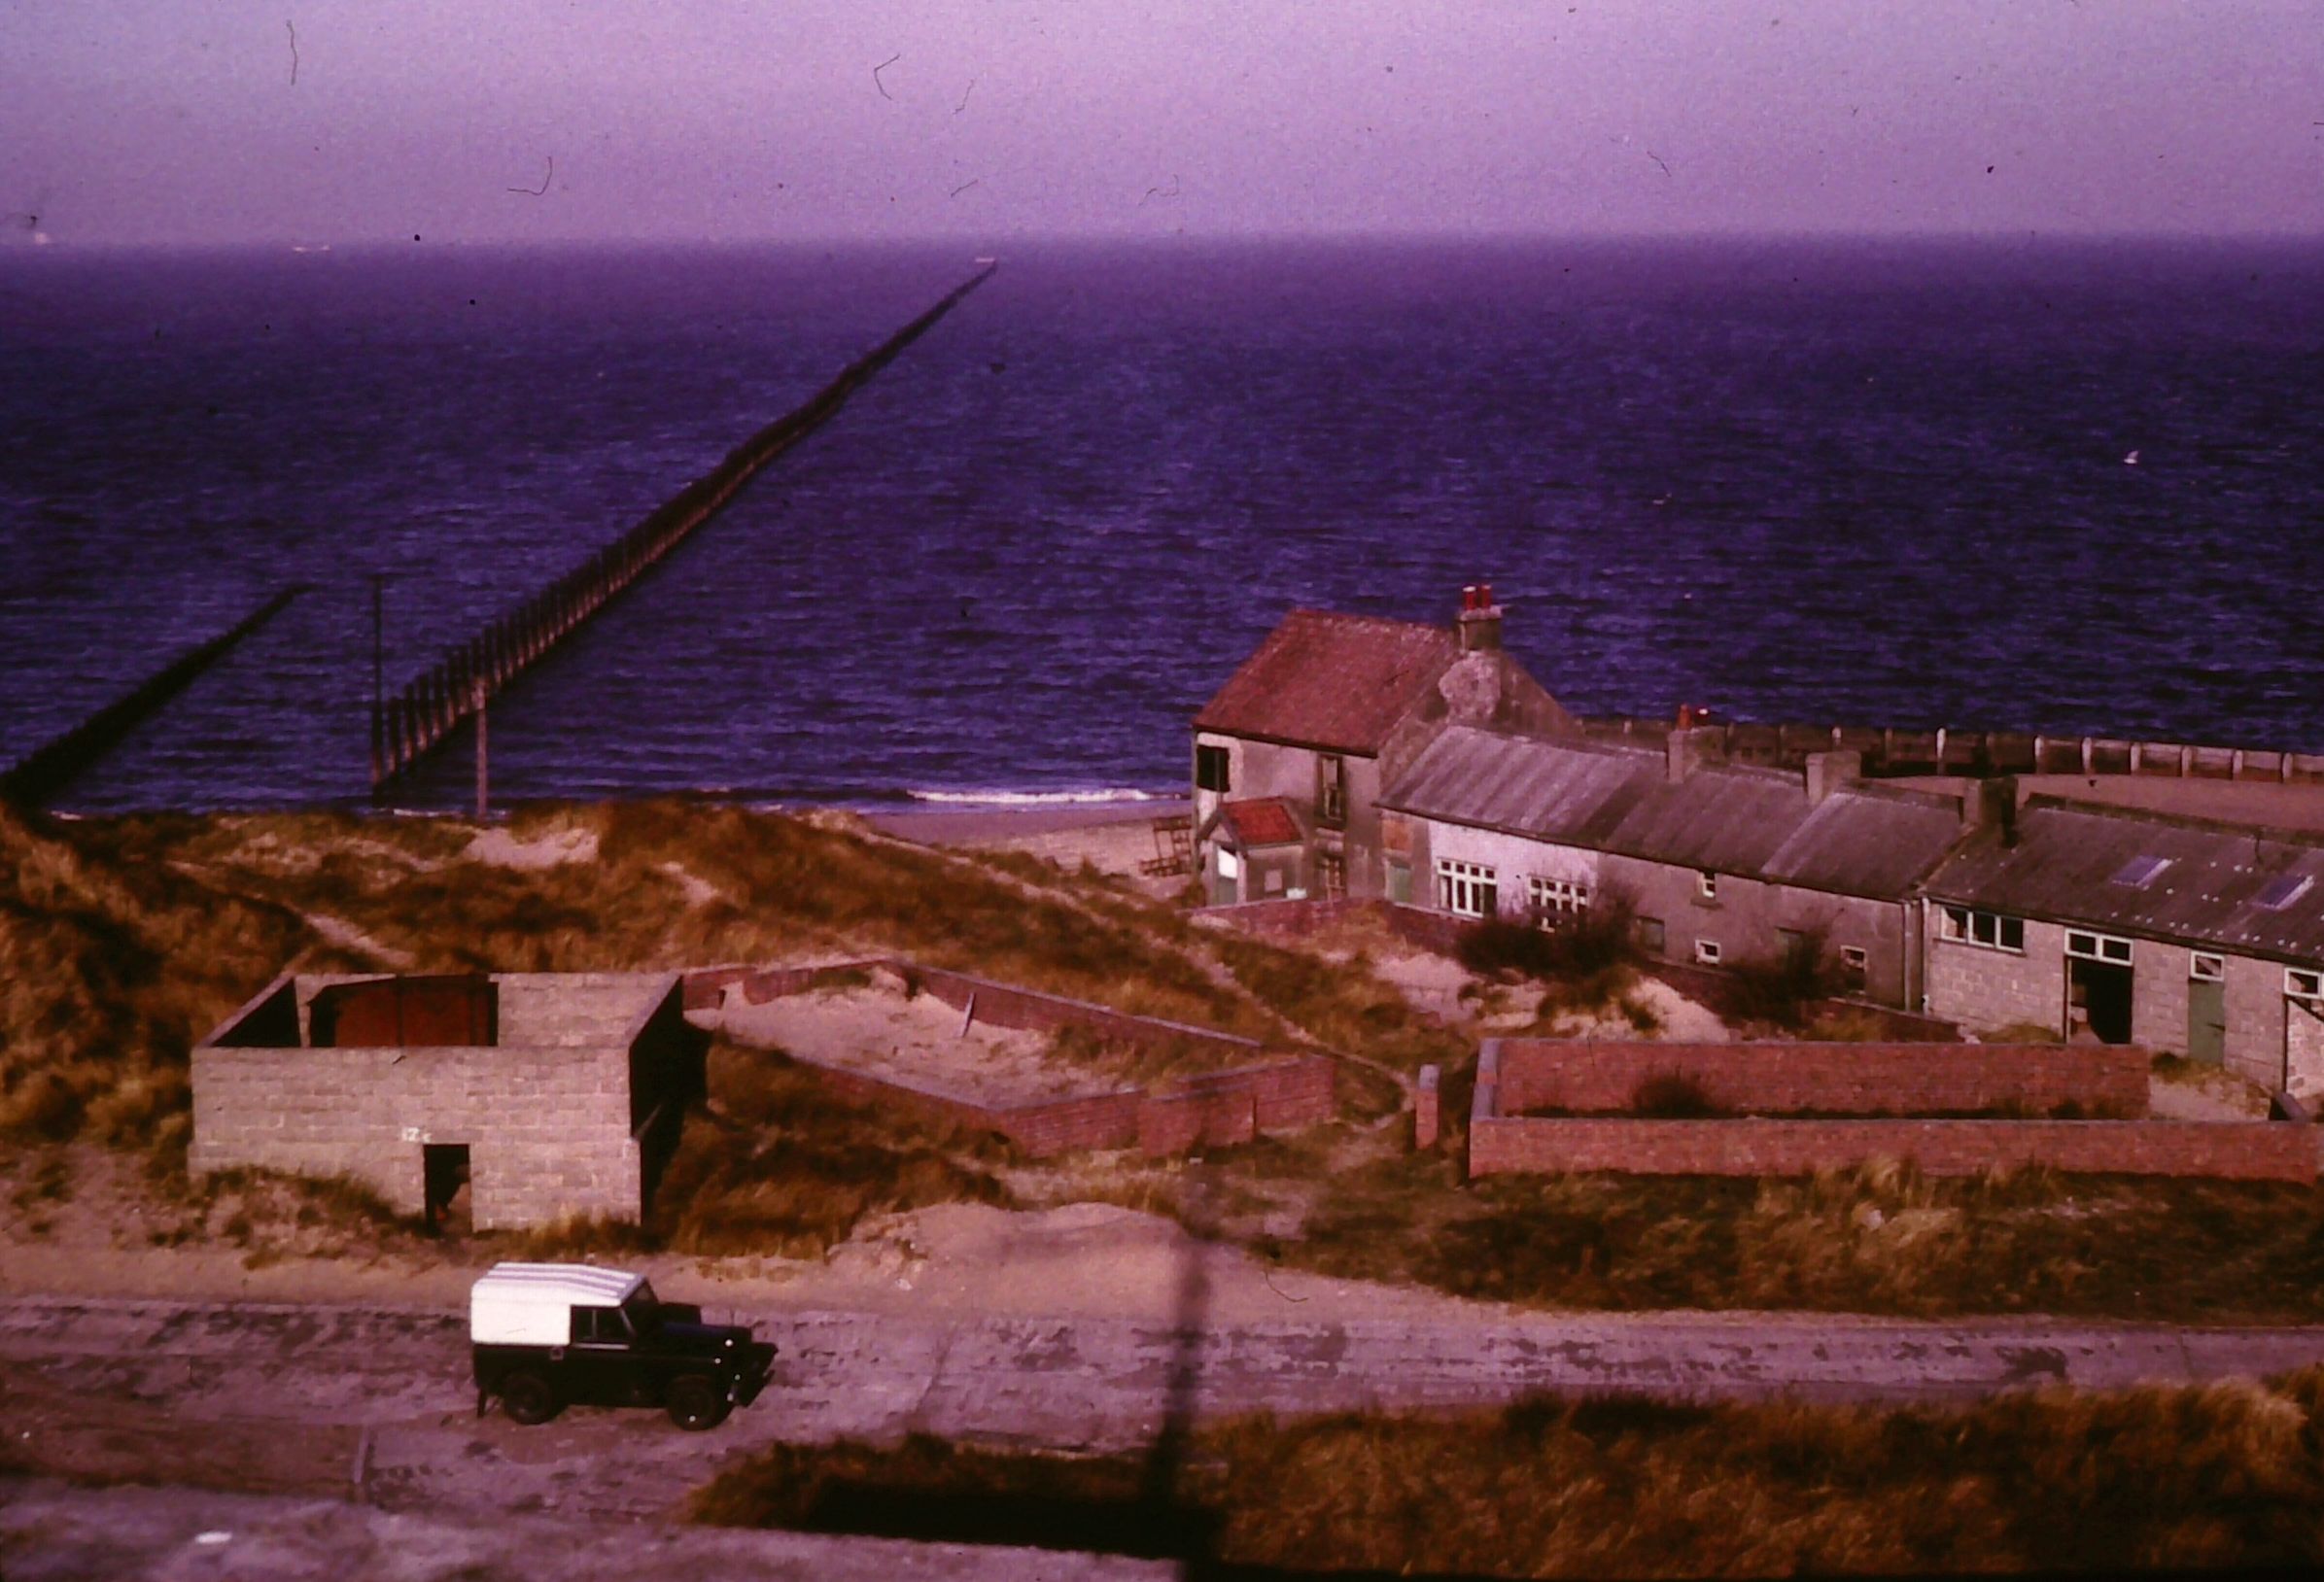 The Old Inn and cottages, 1966